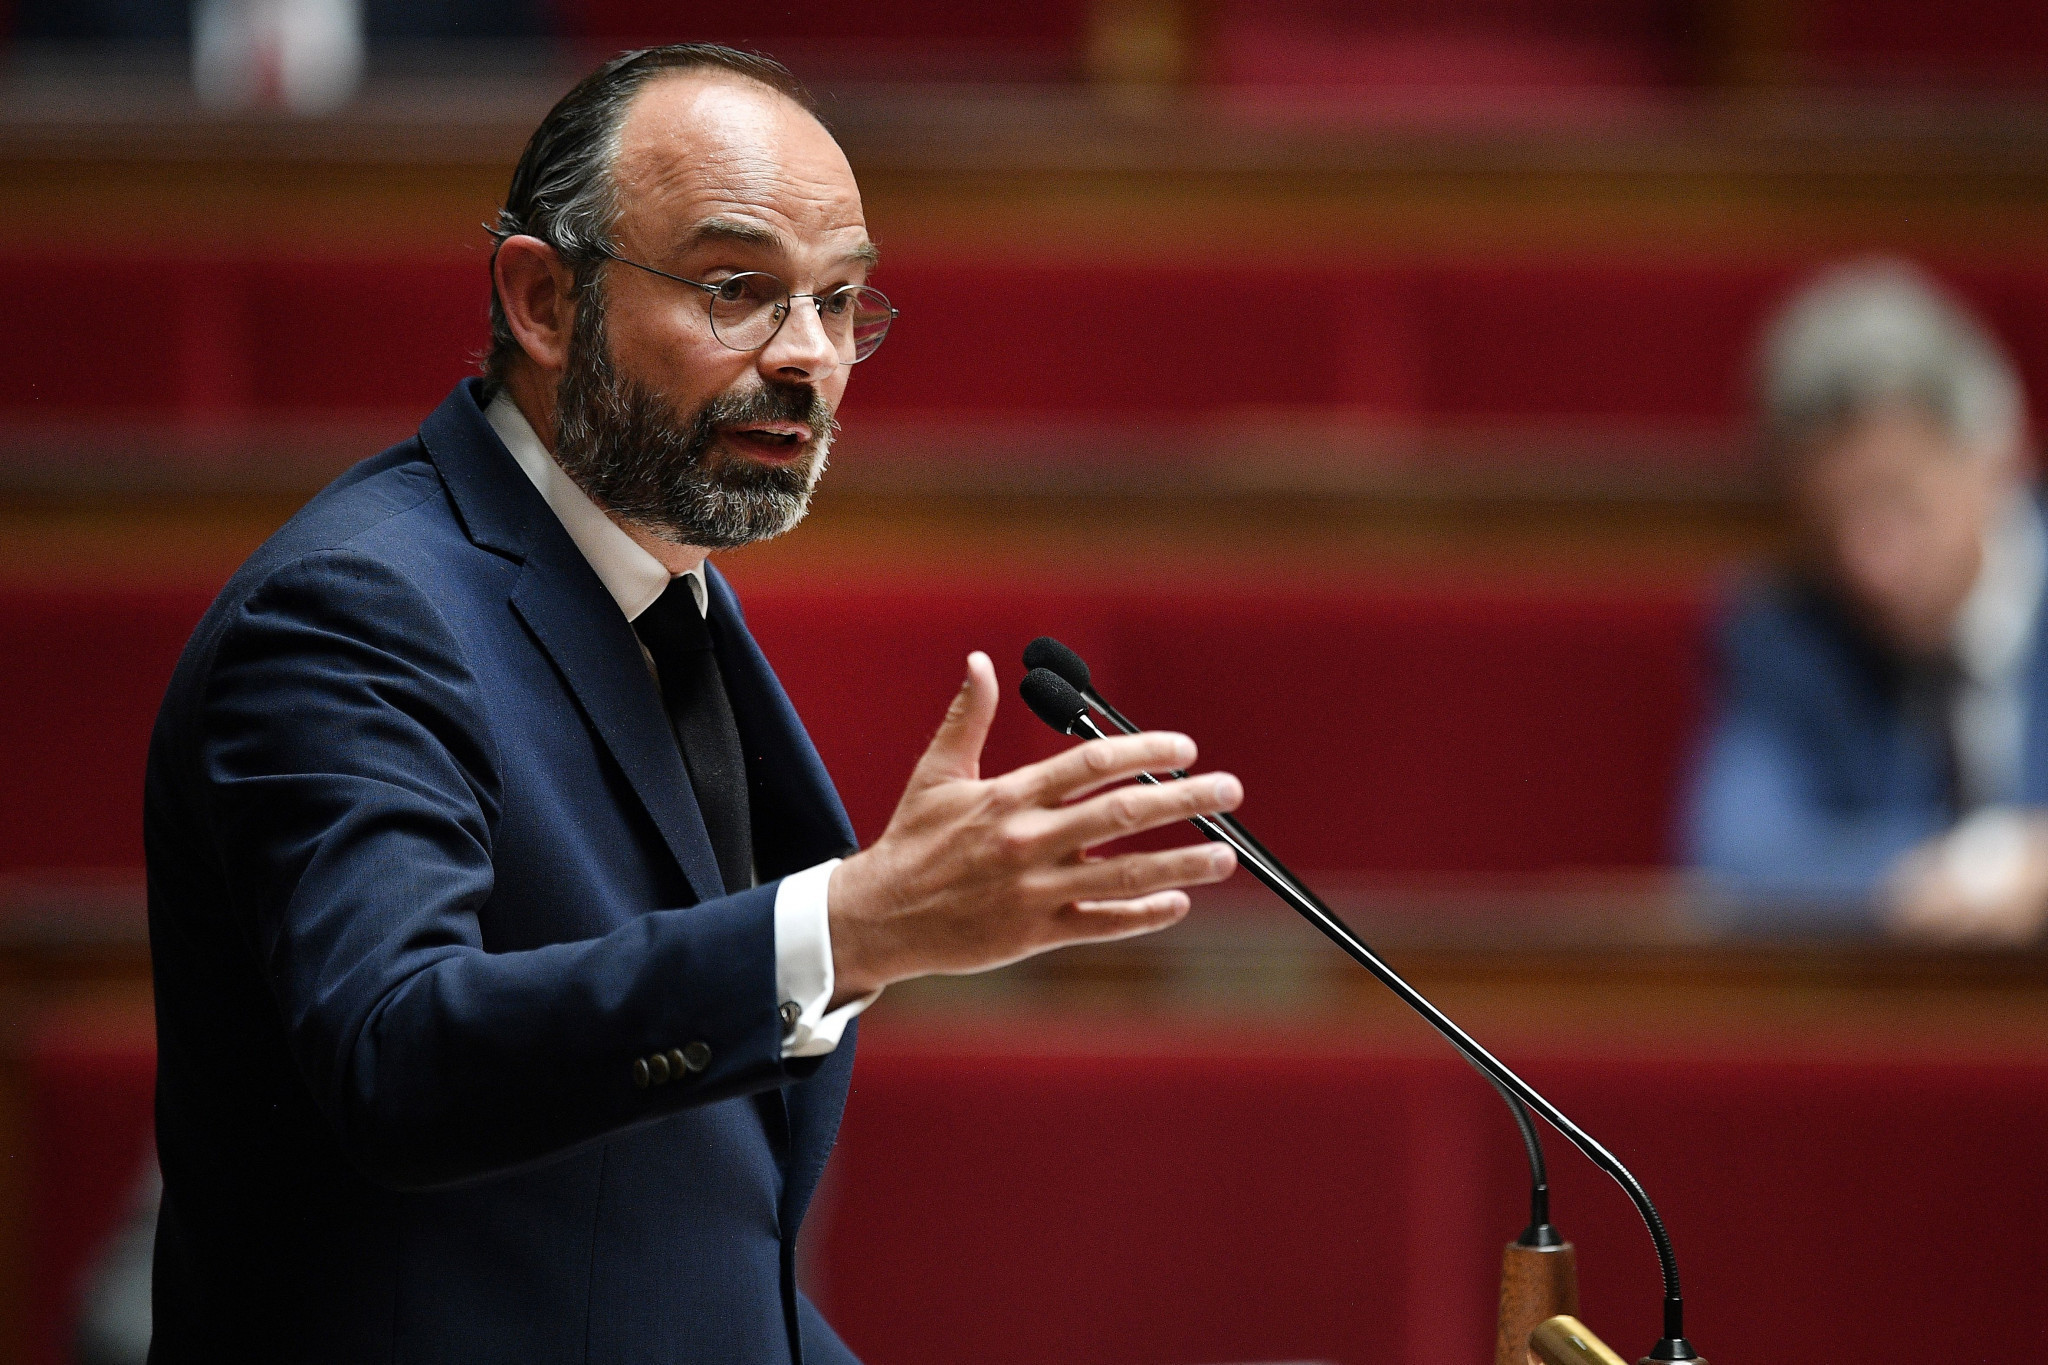 French Prime Minister Edouard Philippe said individual sporting activities could be practised outdoors once lockdown restrictions were eased as long as social distancing was observed ©Getty Images